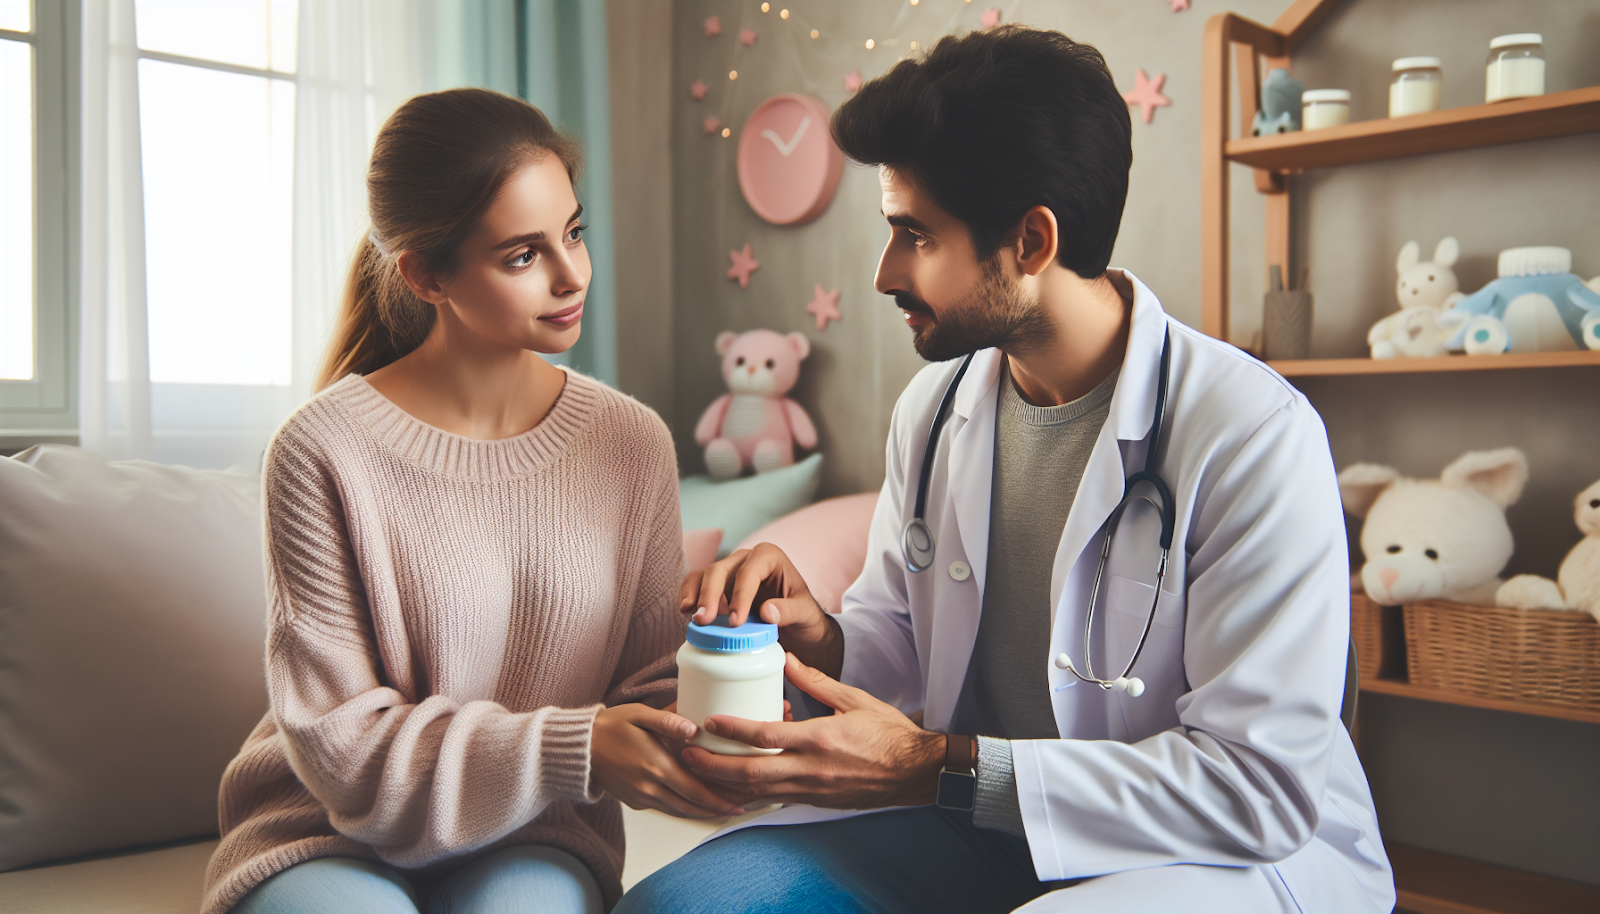 A woman sits attentively as a healthcare professional, identifiable by his white coat and stethoscope, hands her a jar of dairy-free formula in a cozy, child-friendly room decorated with stuffed toys